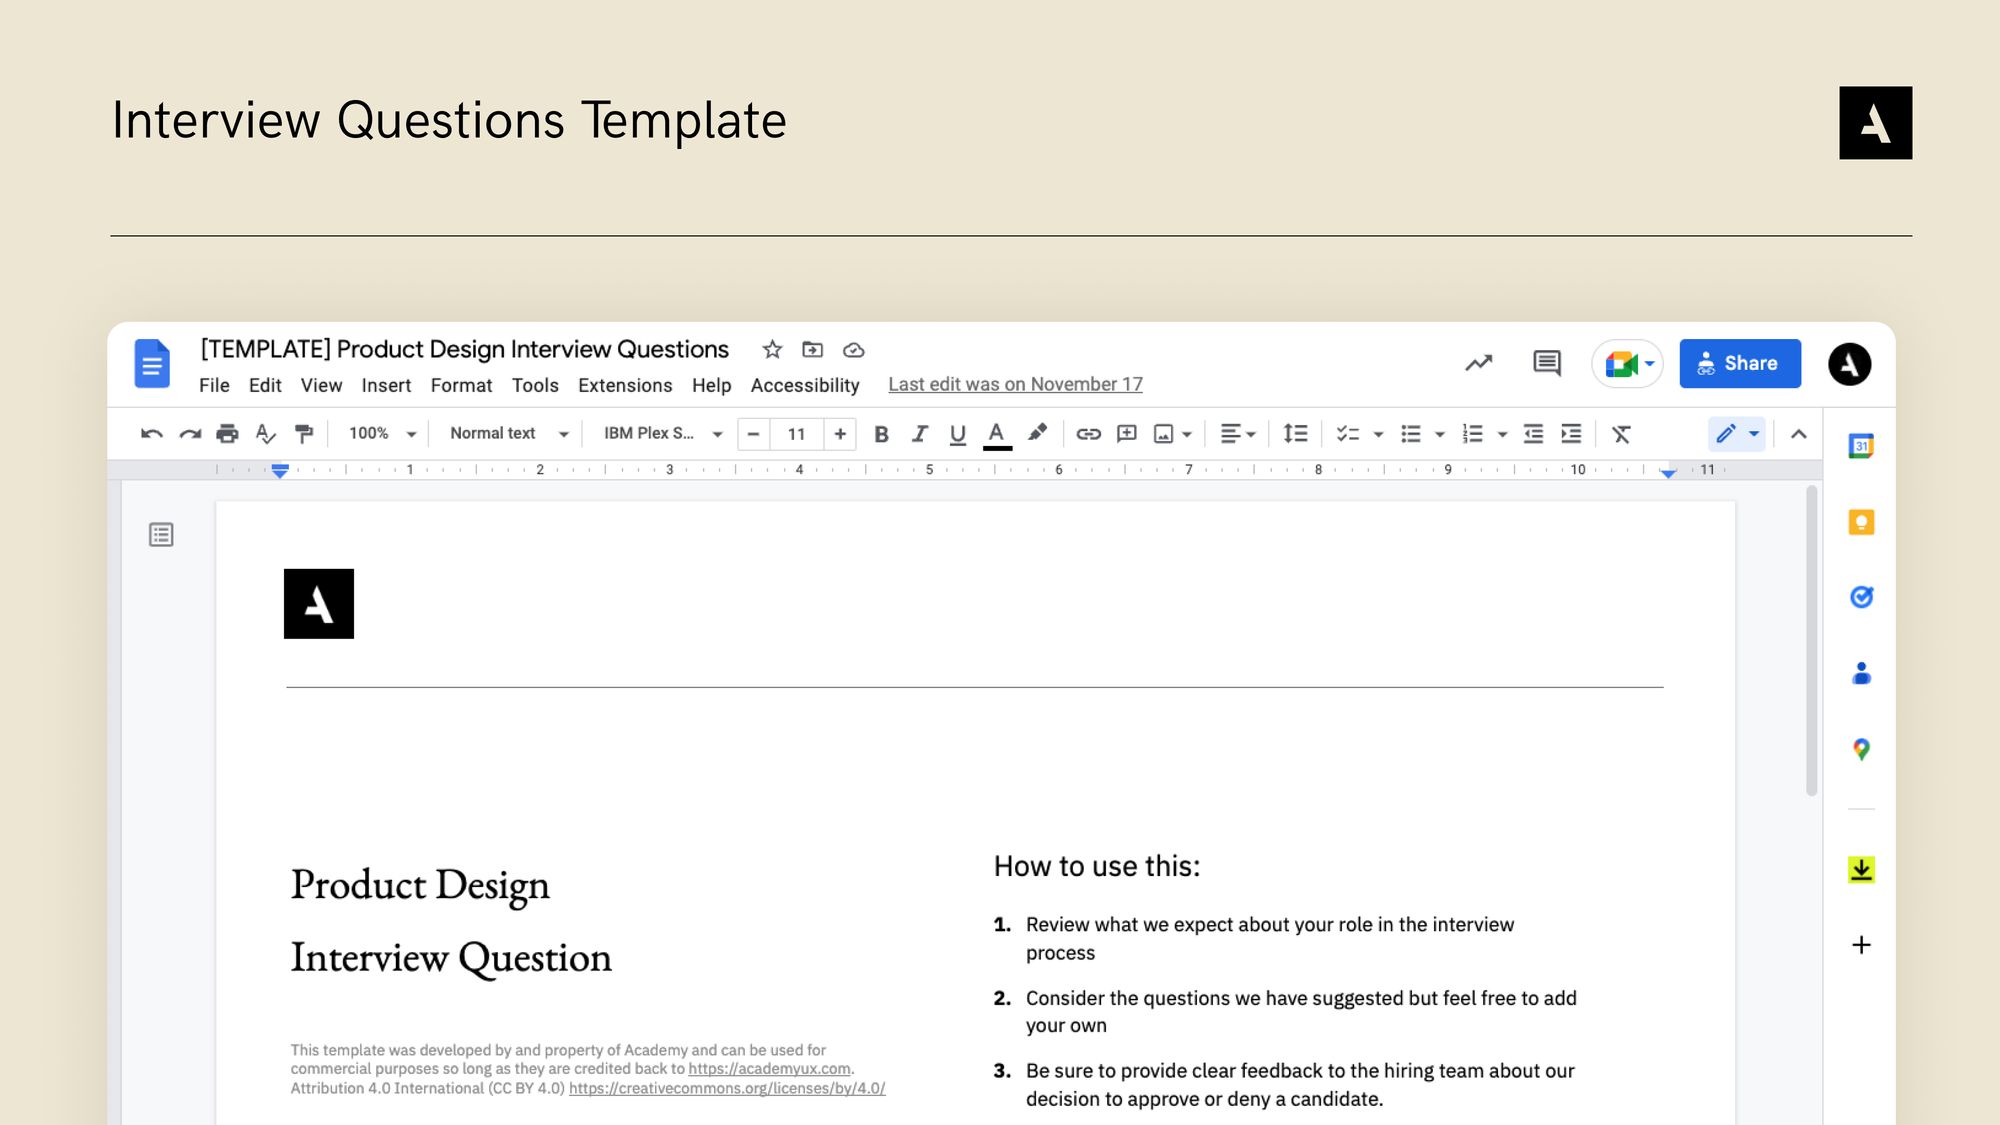 An Image of a template for Interview questions